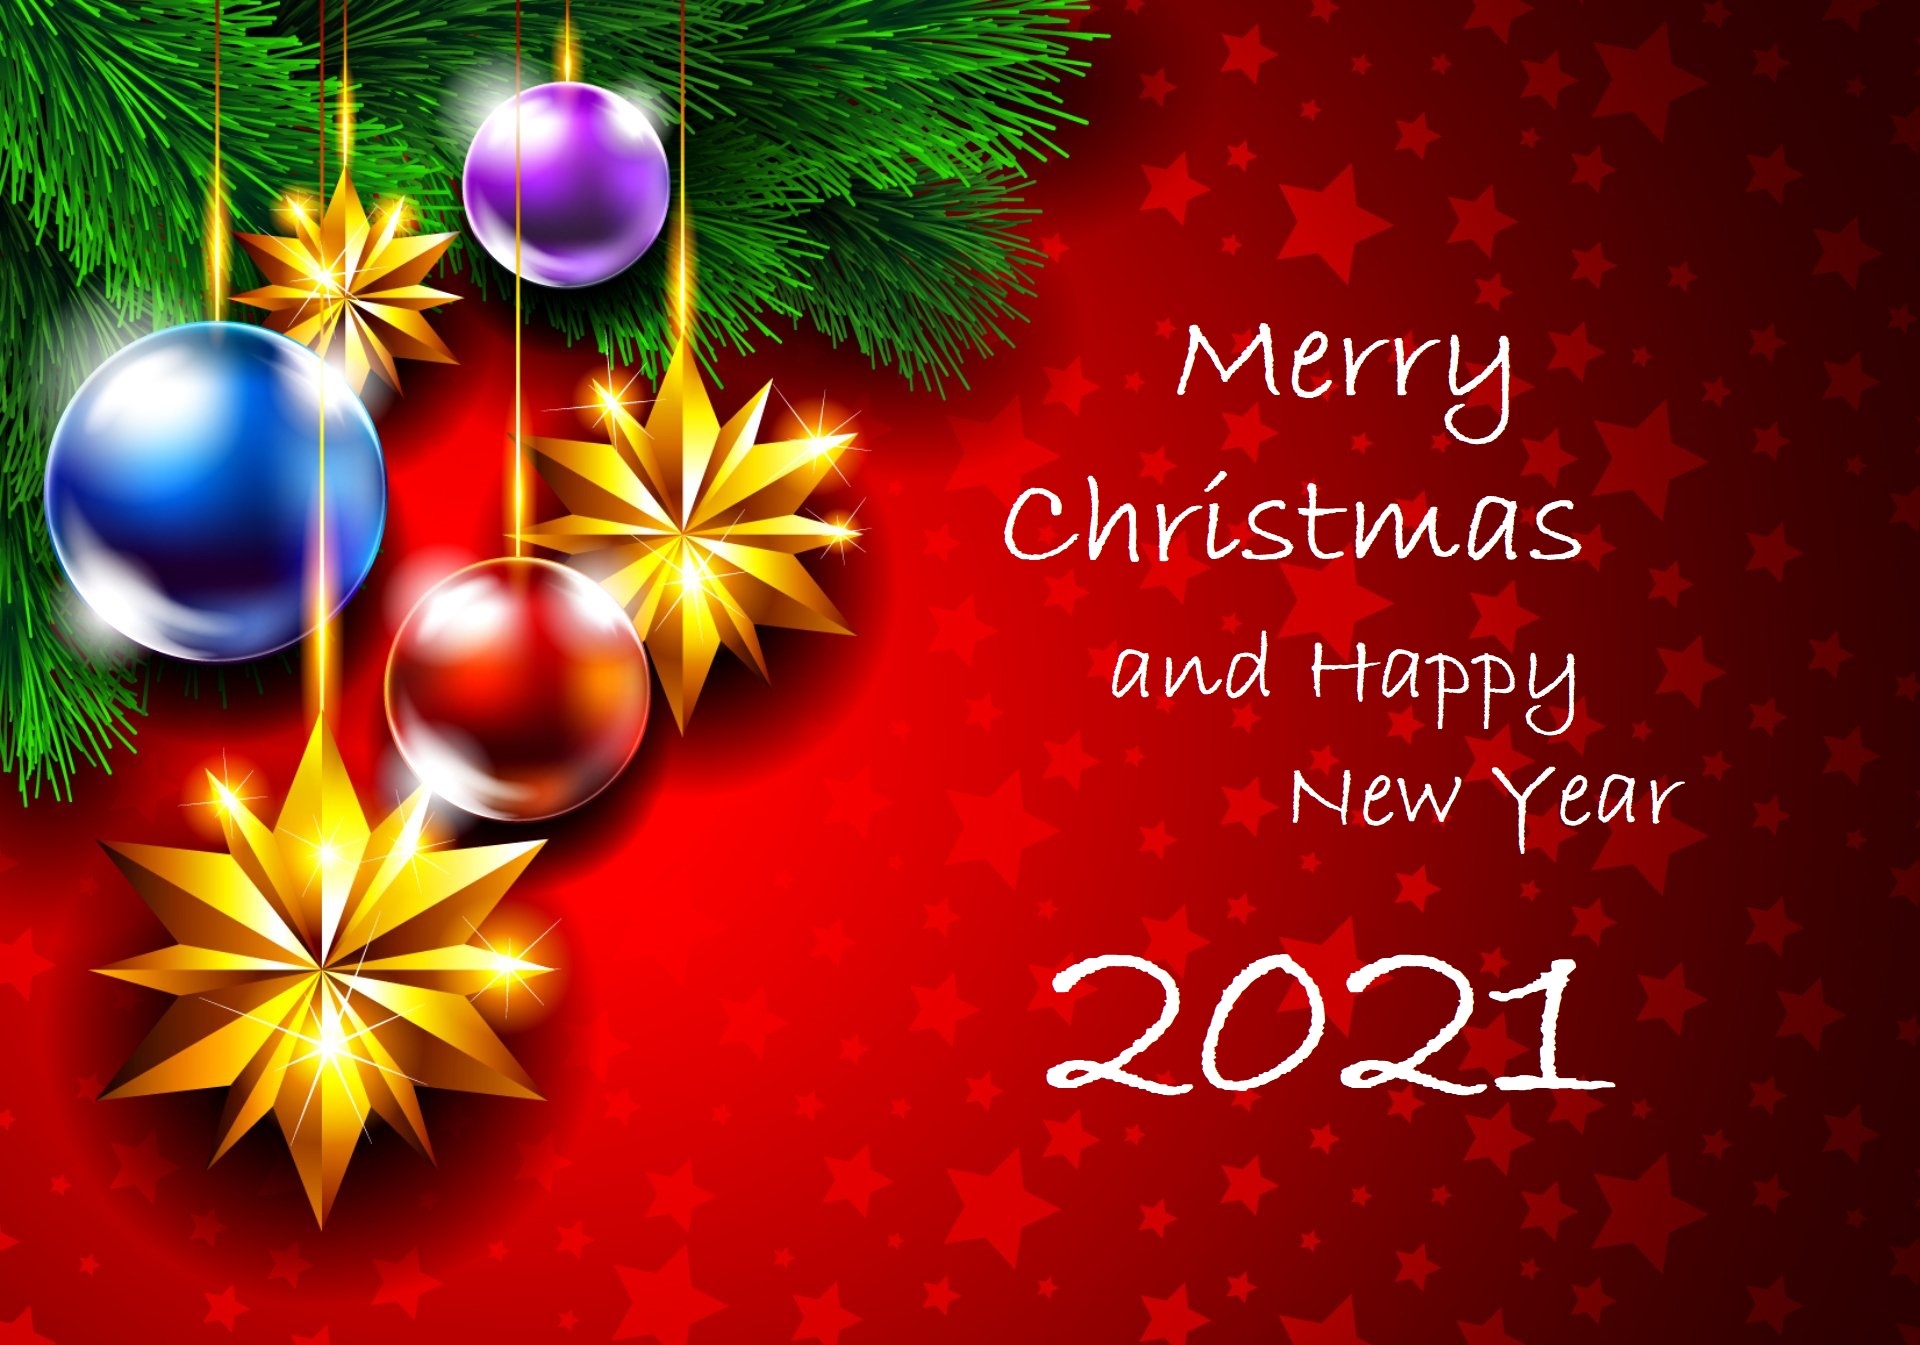 Happy New Year Merry Christmas 2021 Greeting Wallpaper, HD Holidays 4K  Wallpapers, Images, Photos and Background - Wallpapers Den